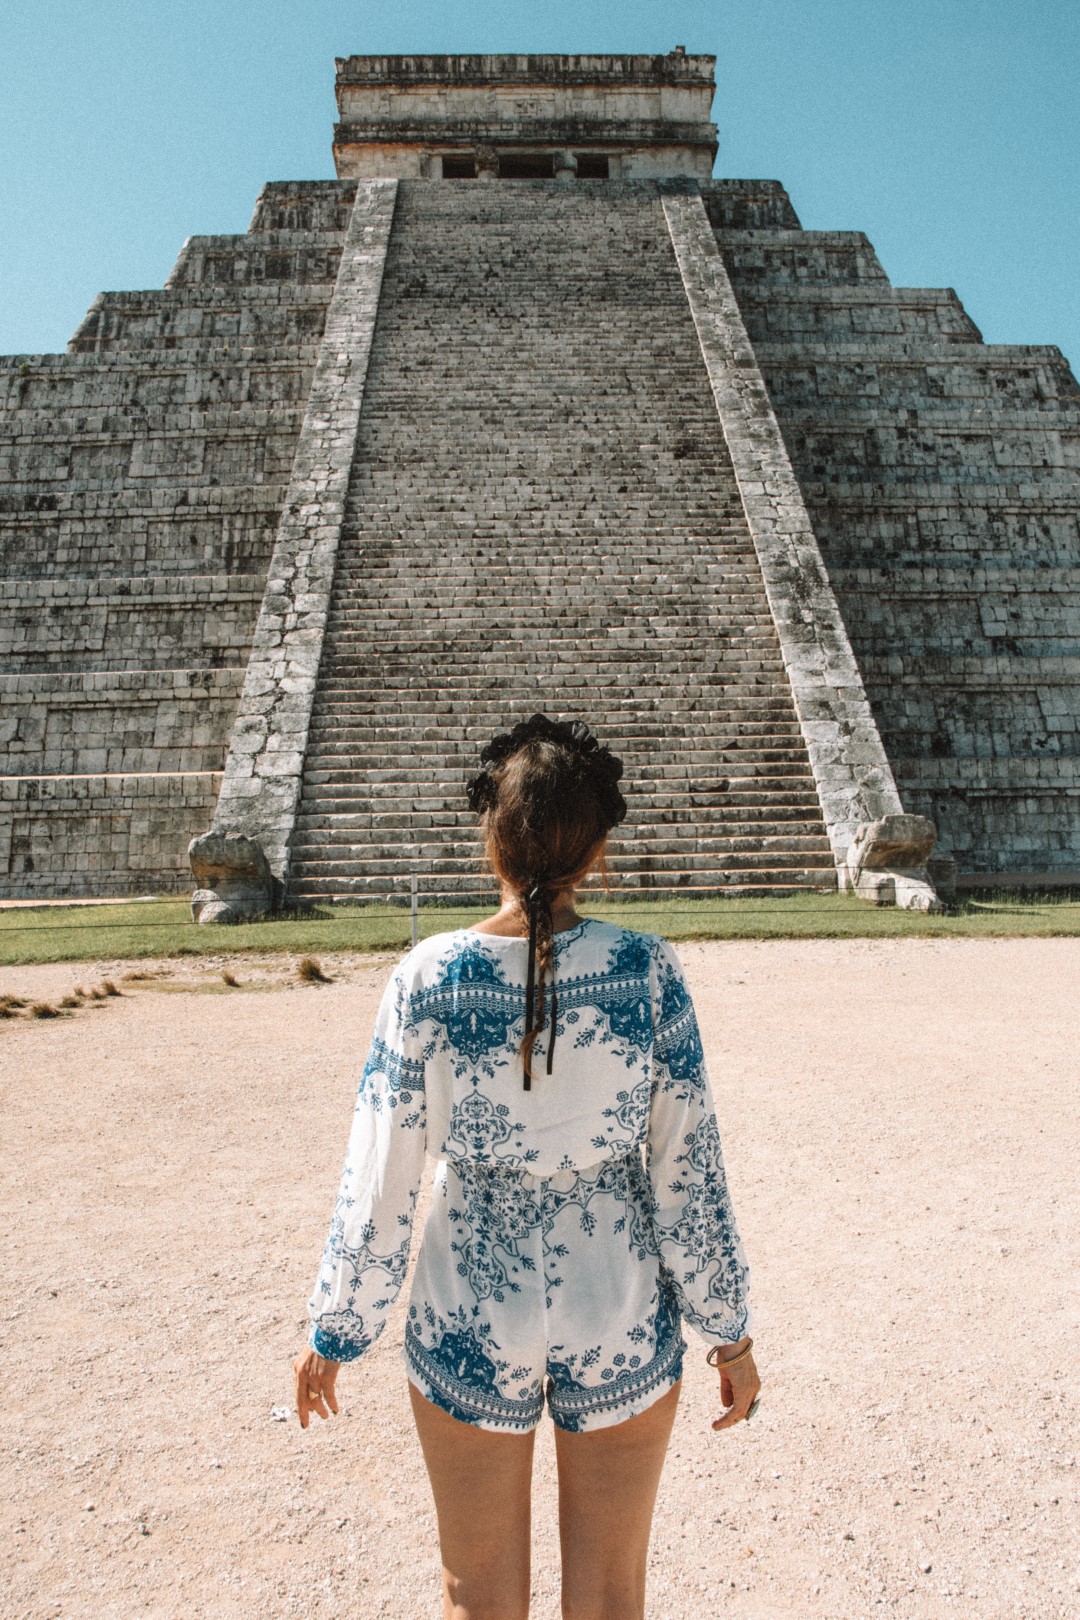 Woman standing in front of El Castillo Pyramid, inserted in a post about going from Playa del Carmen to Chichen Itza.